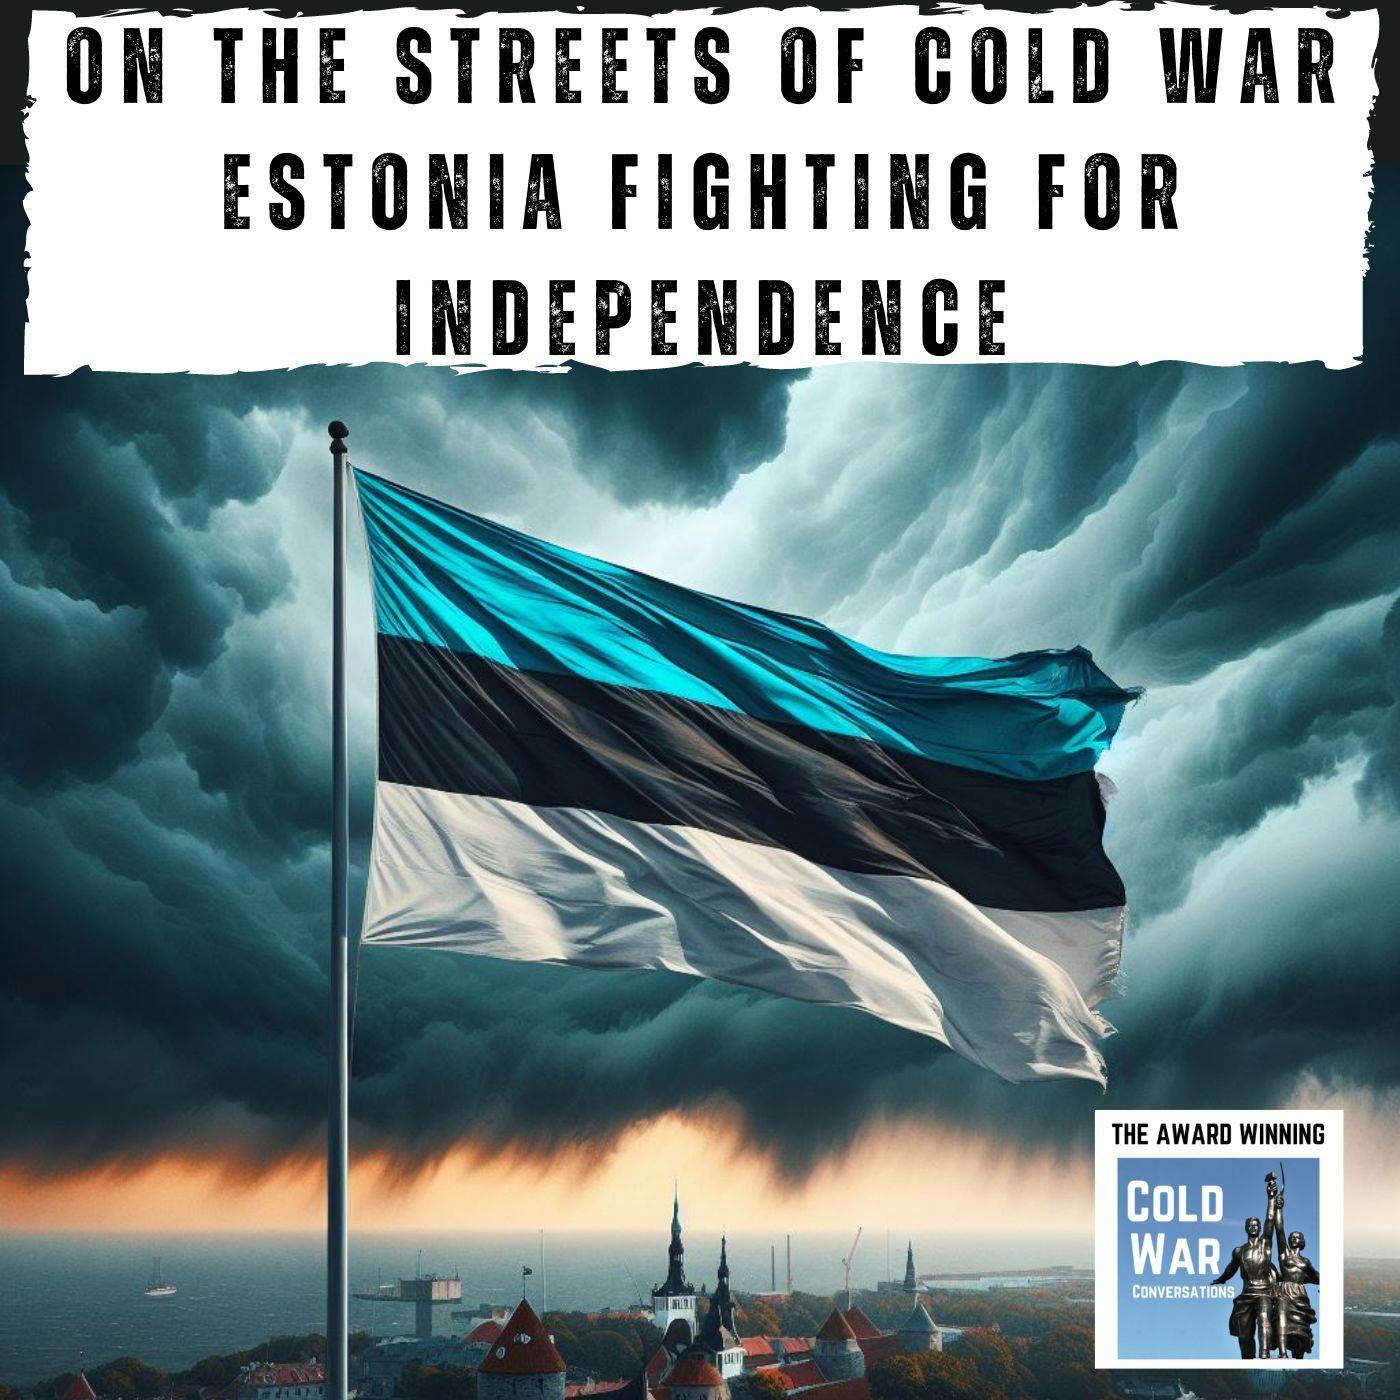 On the Streets of Cold War Estonia fighting for Independence (334)